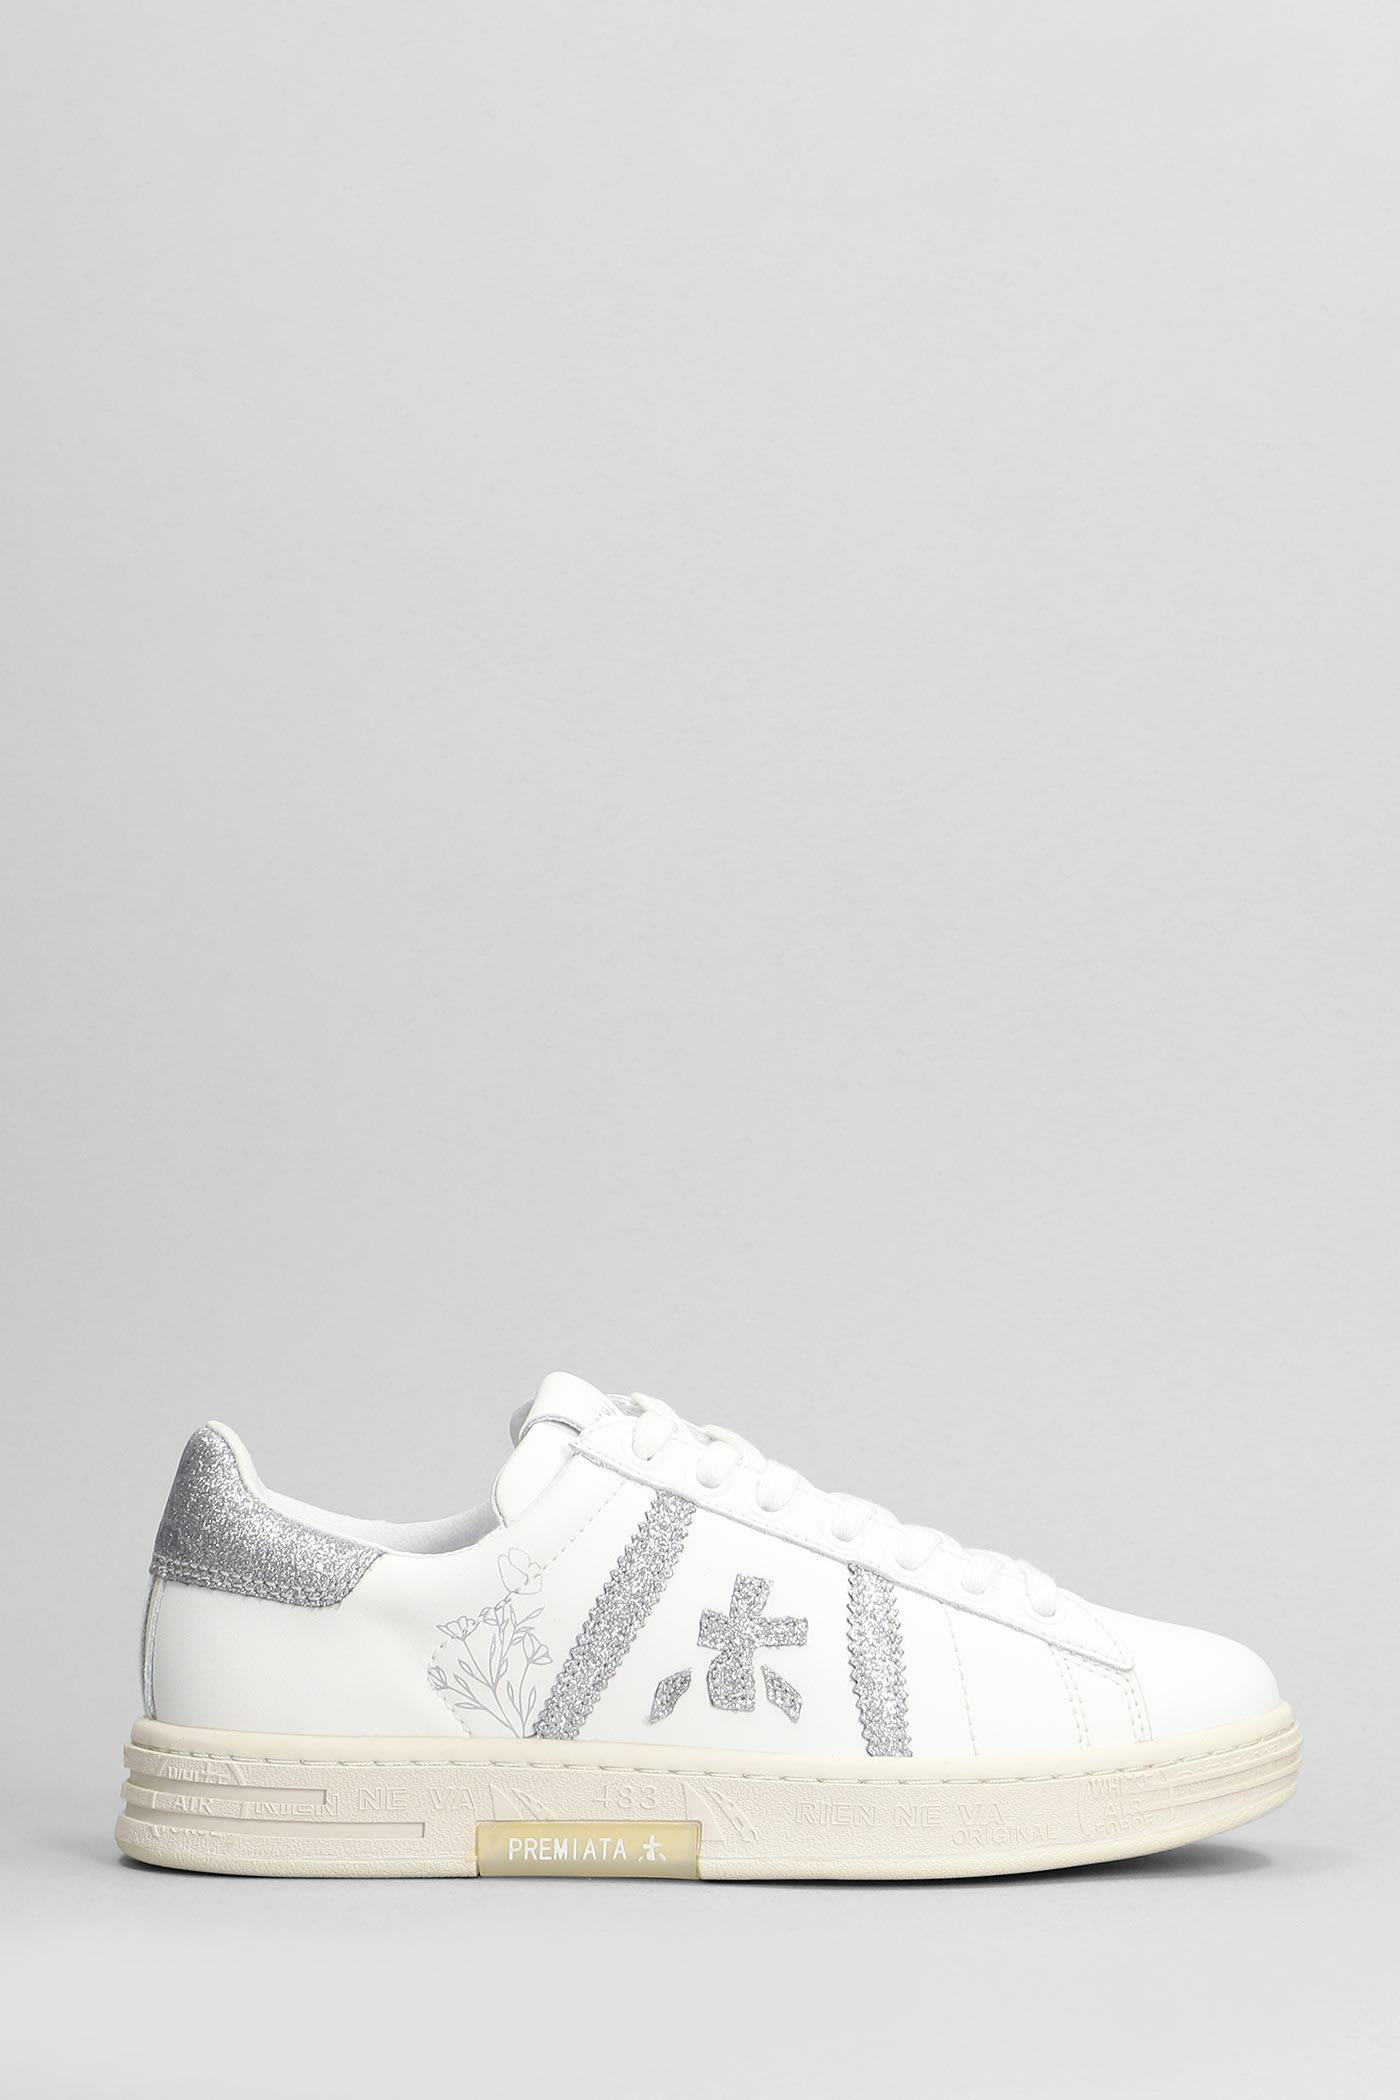 Premiata Russell Sneakers In White Leather